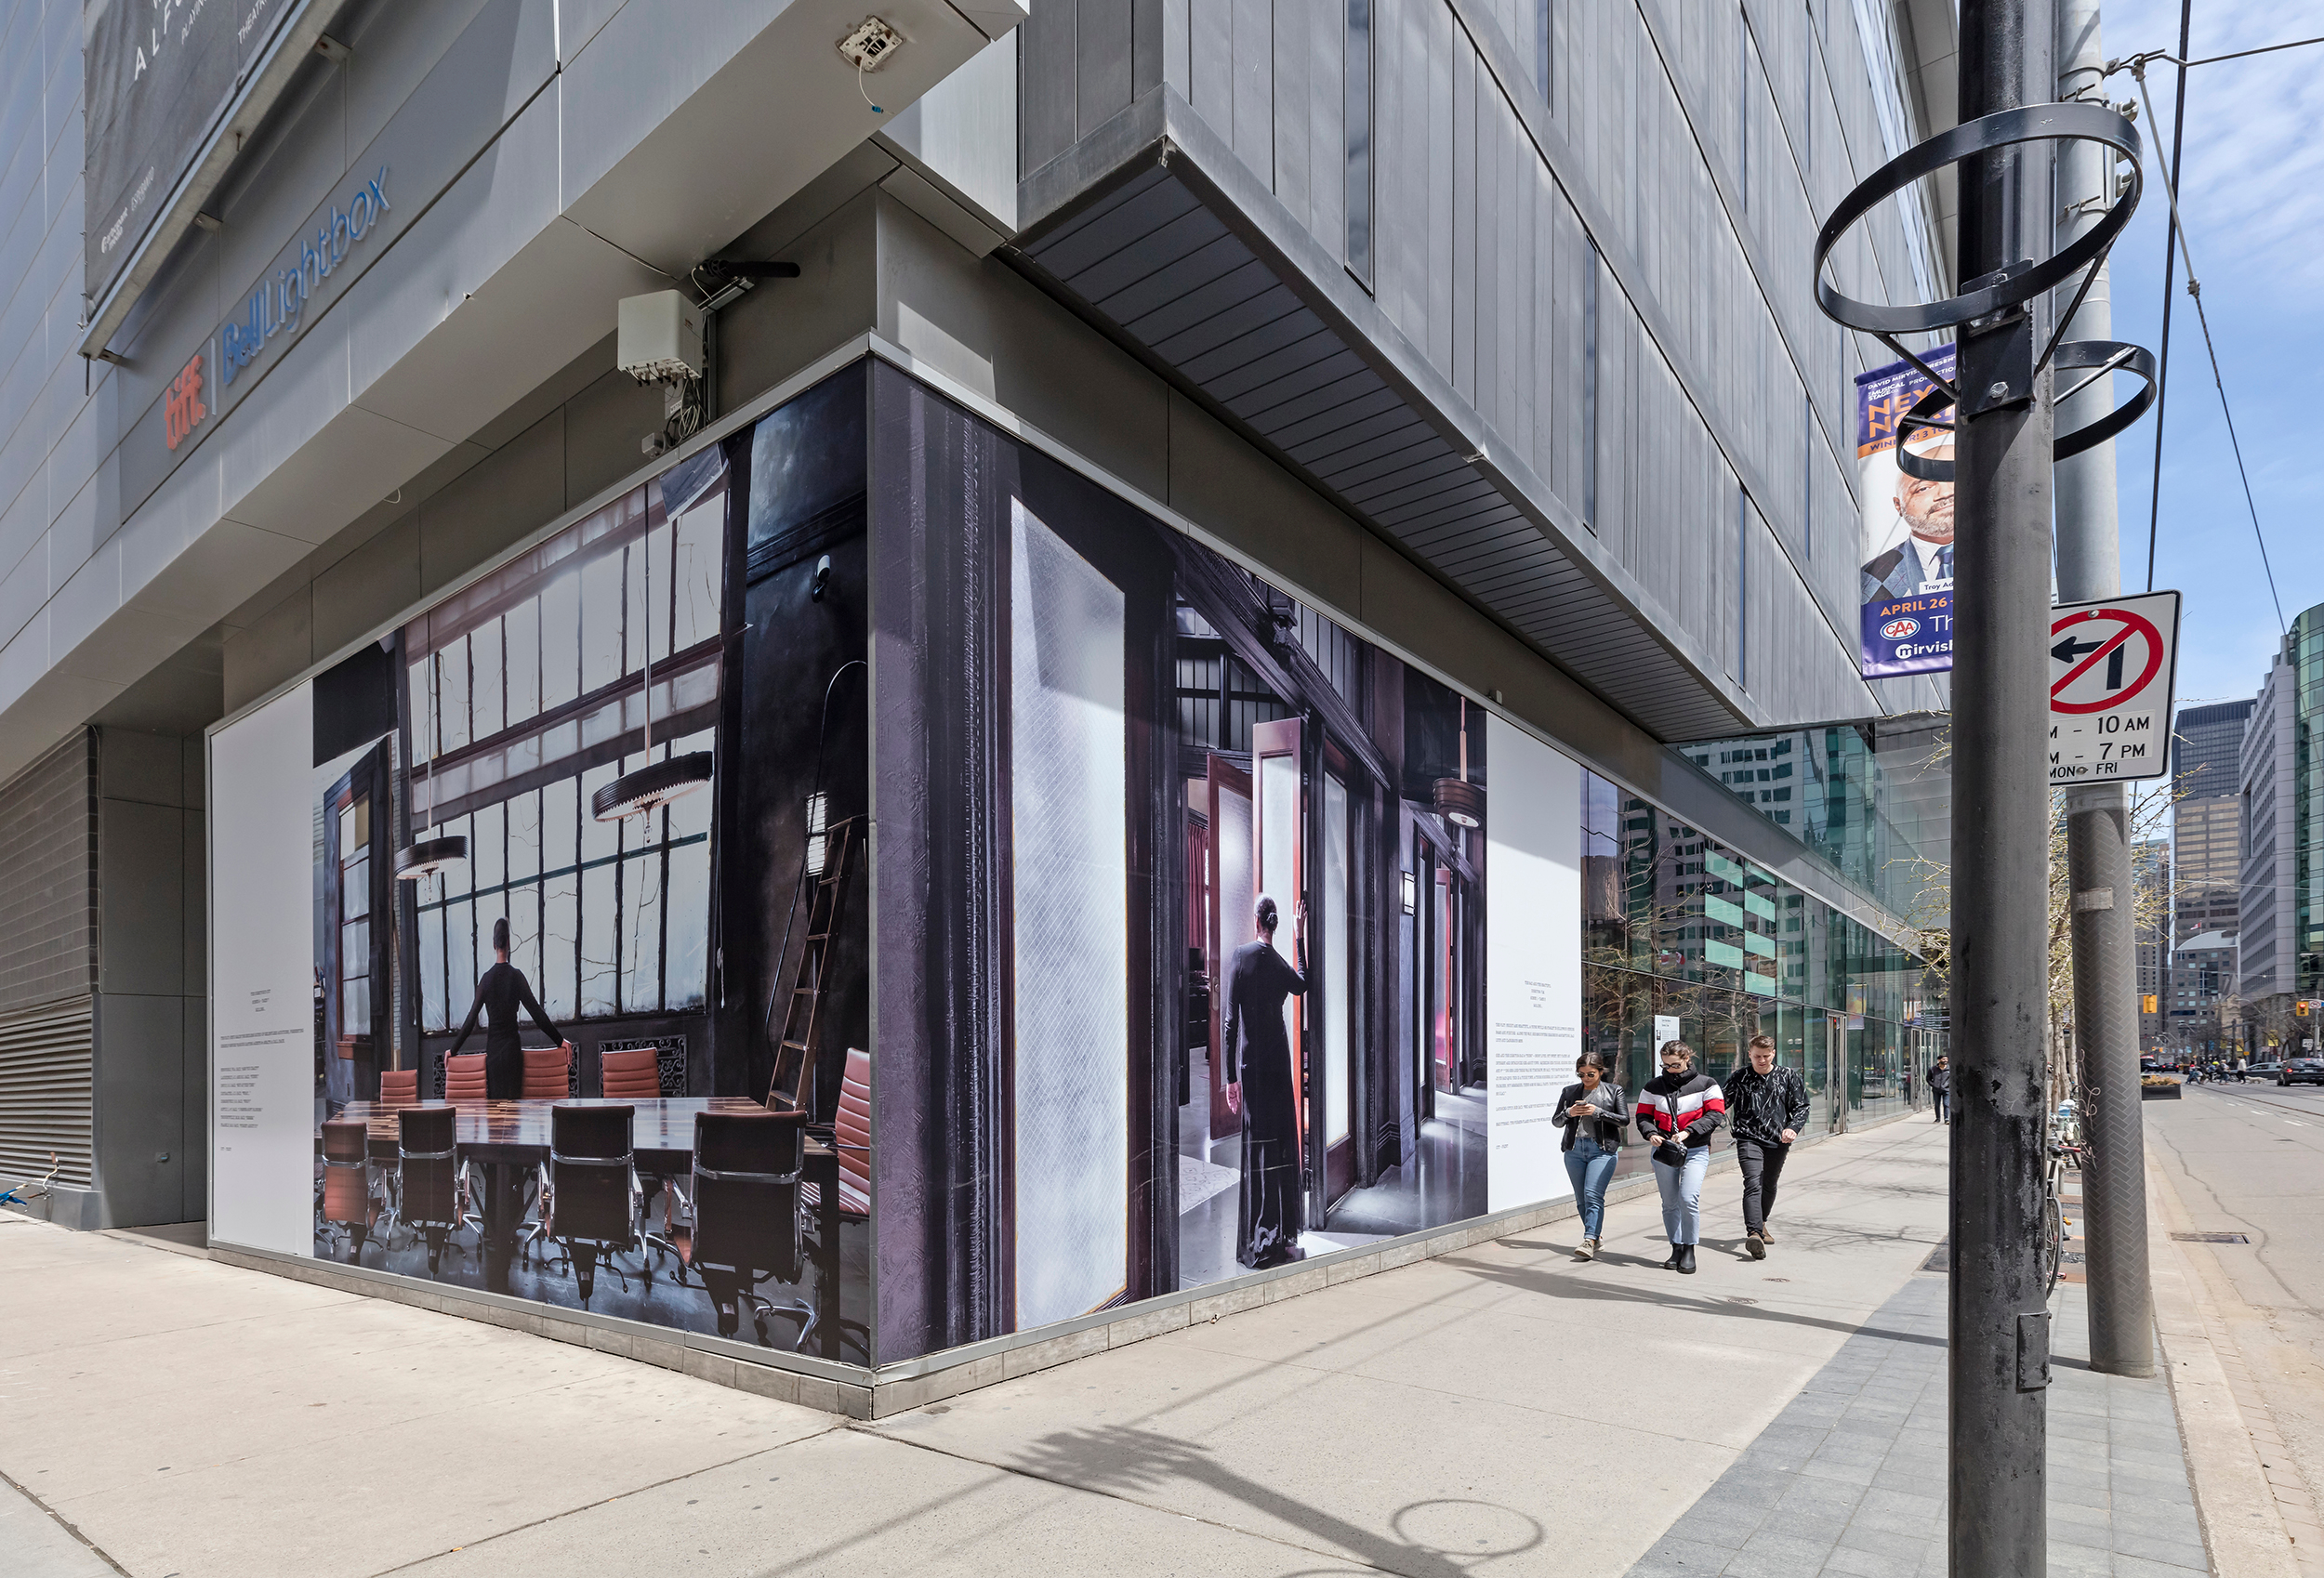     Carrie Mae Weems, irector&#8217;s Cut and The Bad and the Beautiful), 2016., Public Installation at TIFF Bell Lightbox, windows at King St. W. and Widmer St., Toronto, May
1–31, 2019. Photo: Toni Hafkenscheid. © Scotiabank CONTACT Photography Festival.
Courtesy the artist and Jack Shainman Gallery, New York, NY.

